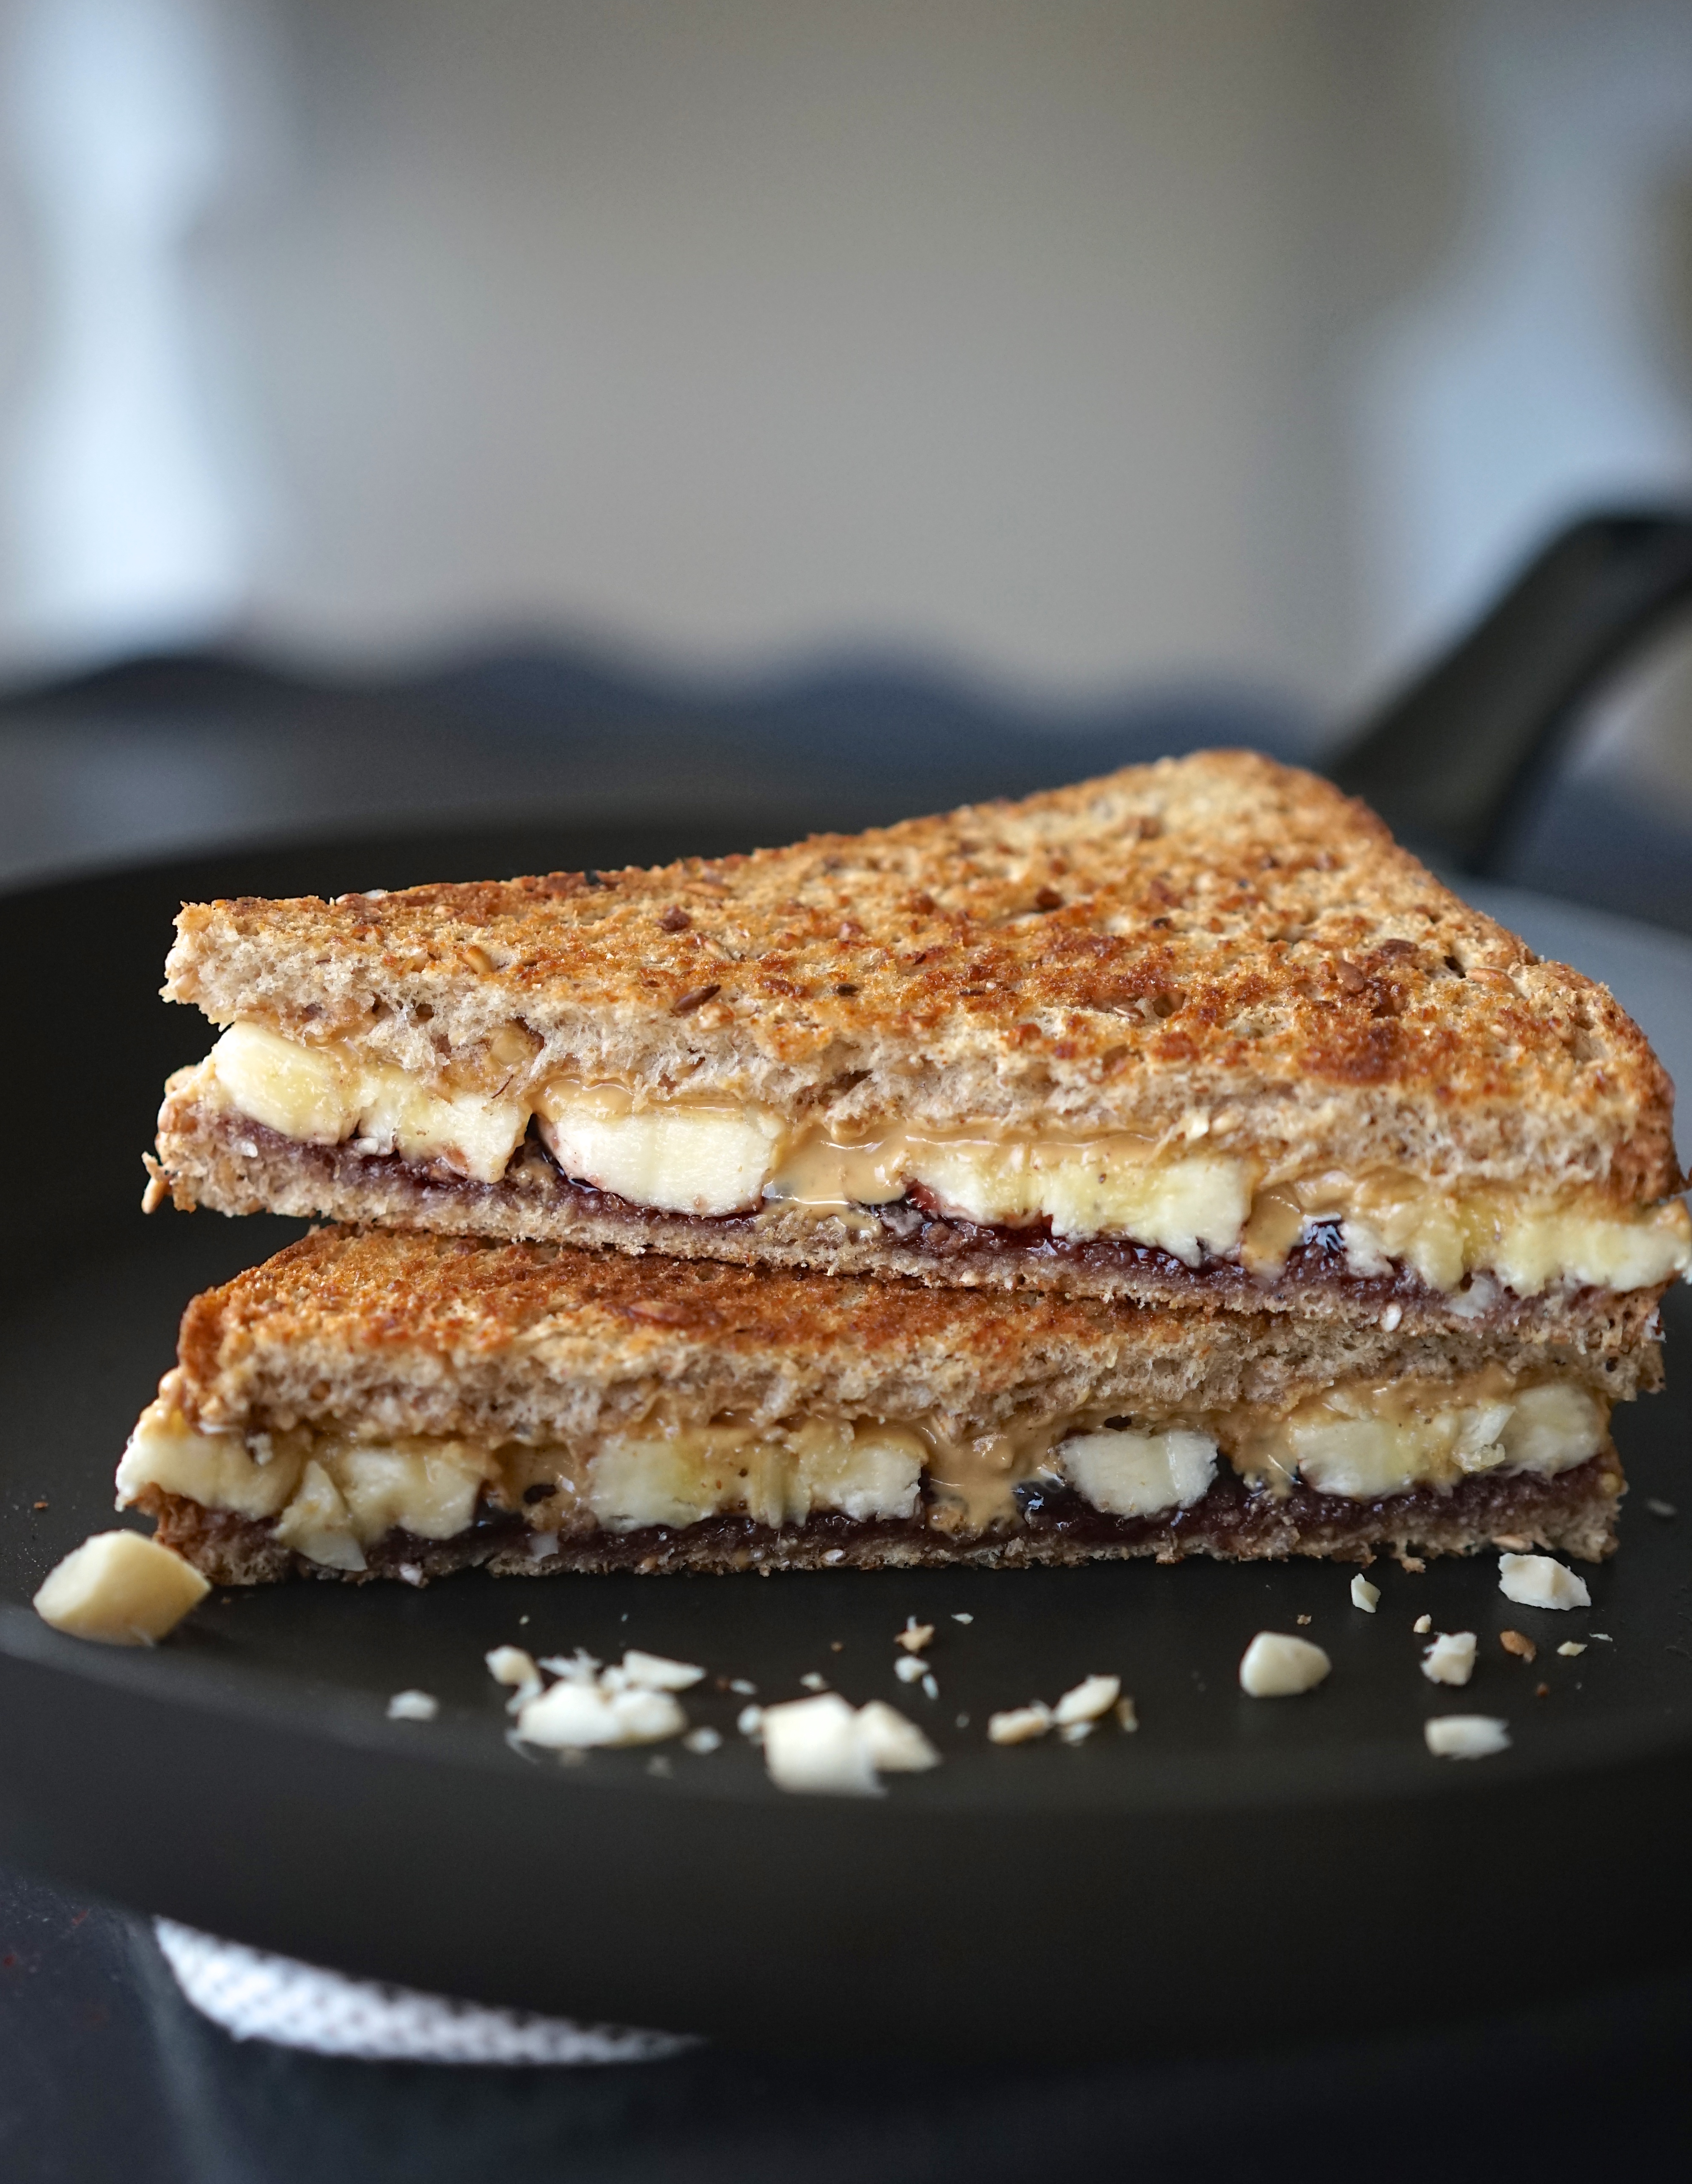 Toasted Peanut Butter, Banana & Blackberry Jam Sandwich with Macadamia Nuts | Living Healthy in Seattle